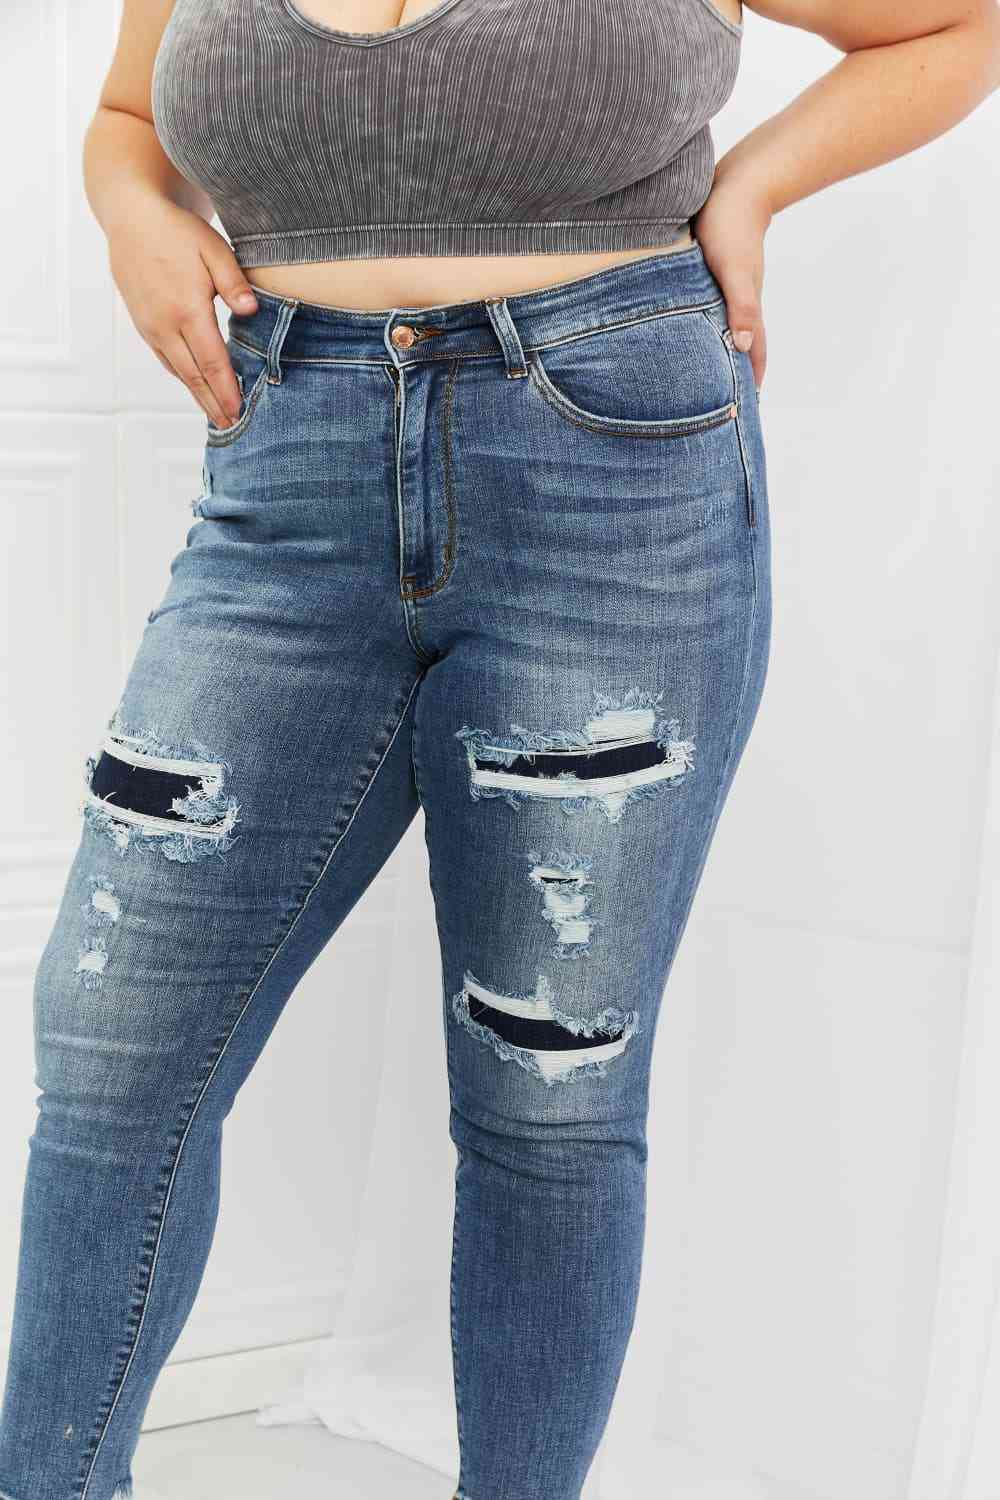 Judy Blue Dahlia Full Size Distressed Patch Jeans  Krazy Heart Designs Boutique   